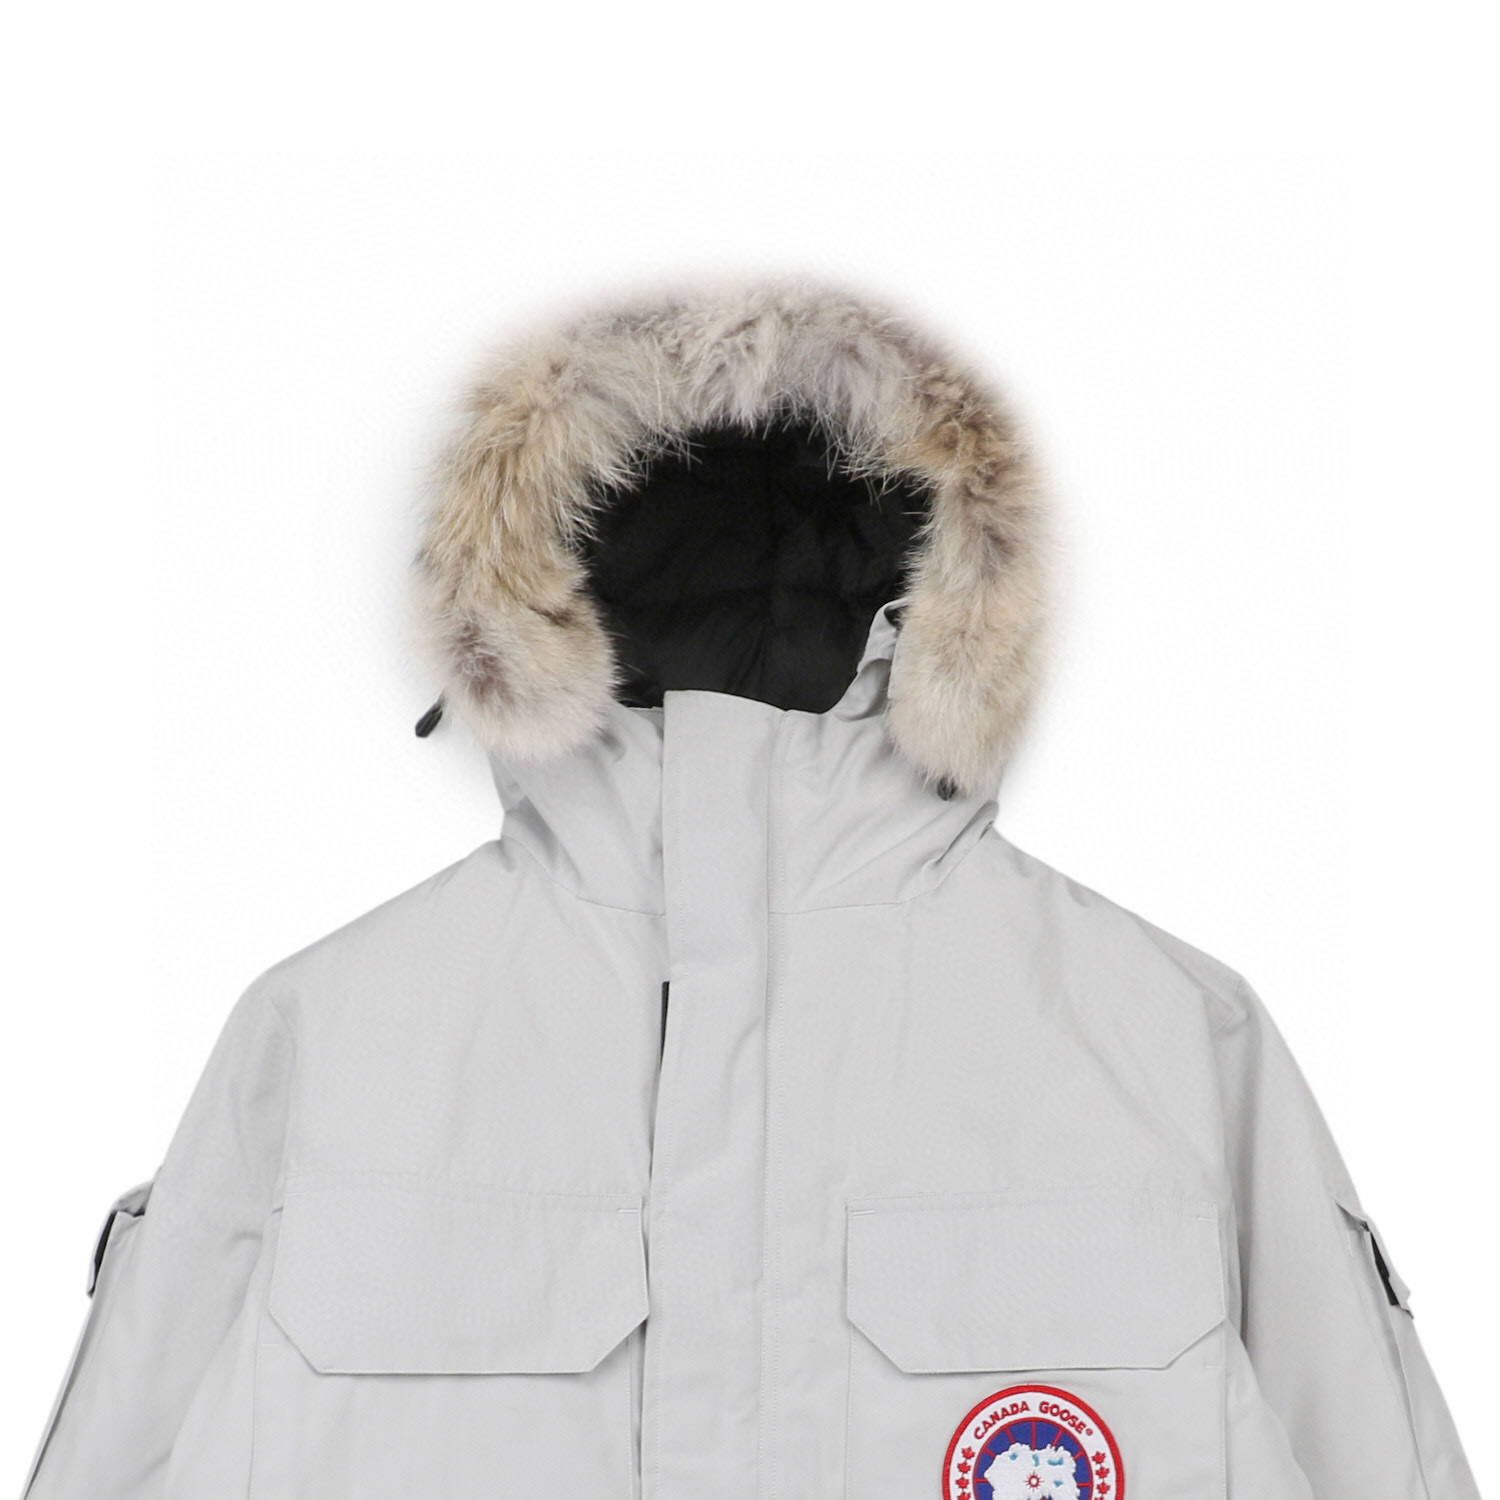 08 Canada Goose 19fw Expedition 4660ma Down Jacket Coat Silver White (5) - newkick.org